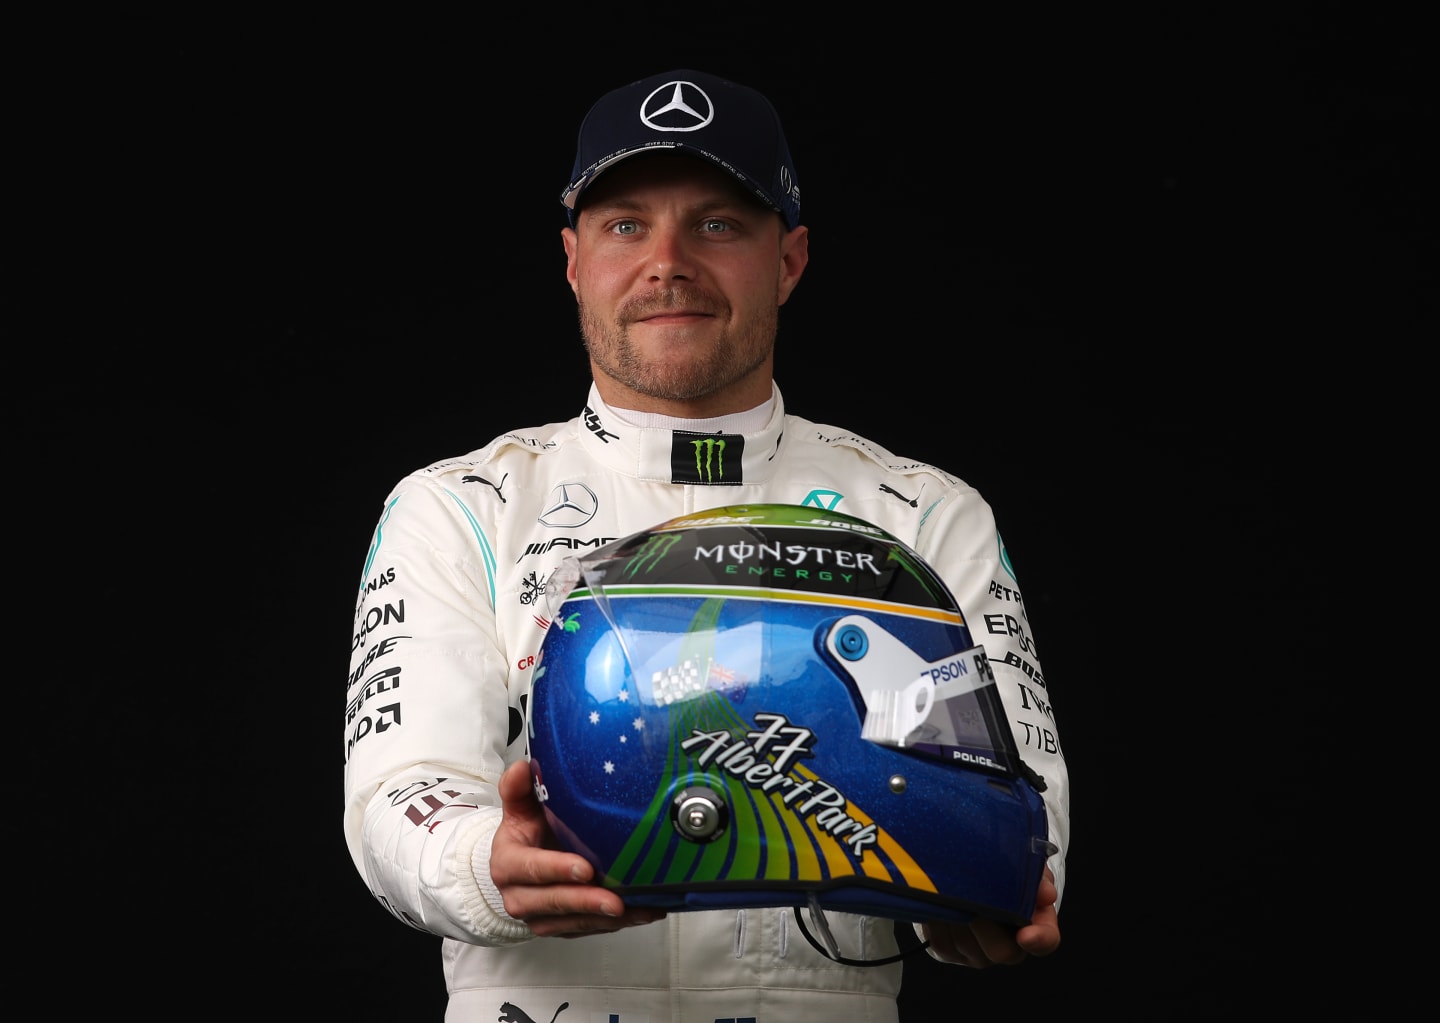 MELBOURNE, AUSTRALIA - MARCH 12: Valtteri Bottas of Finland and Mercedes GP poses for a photo in